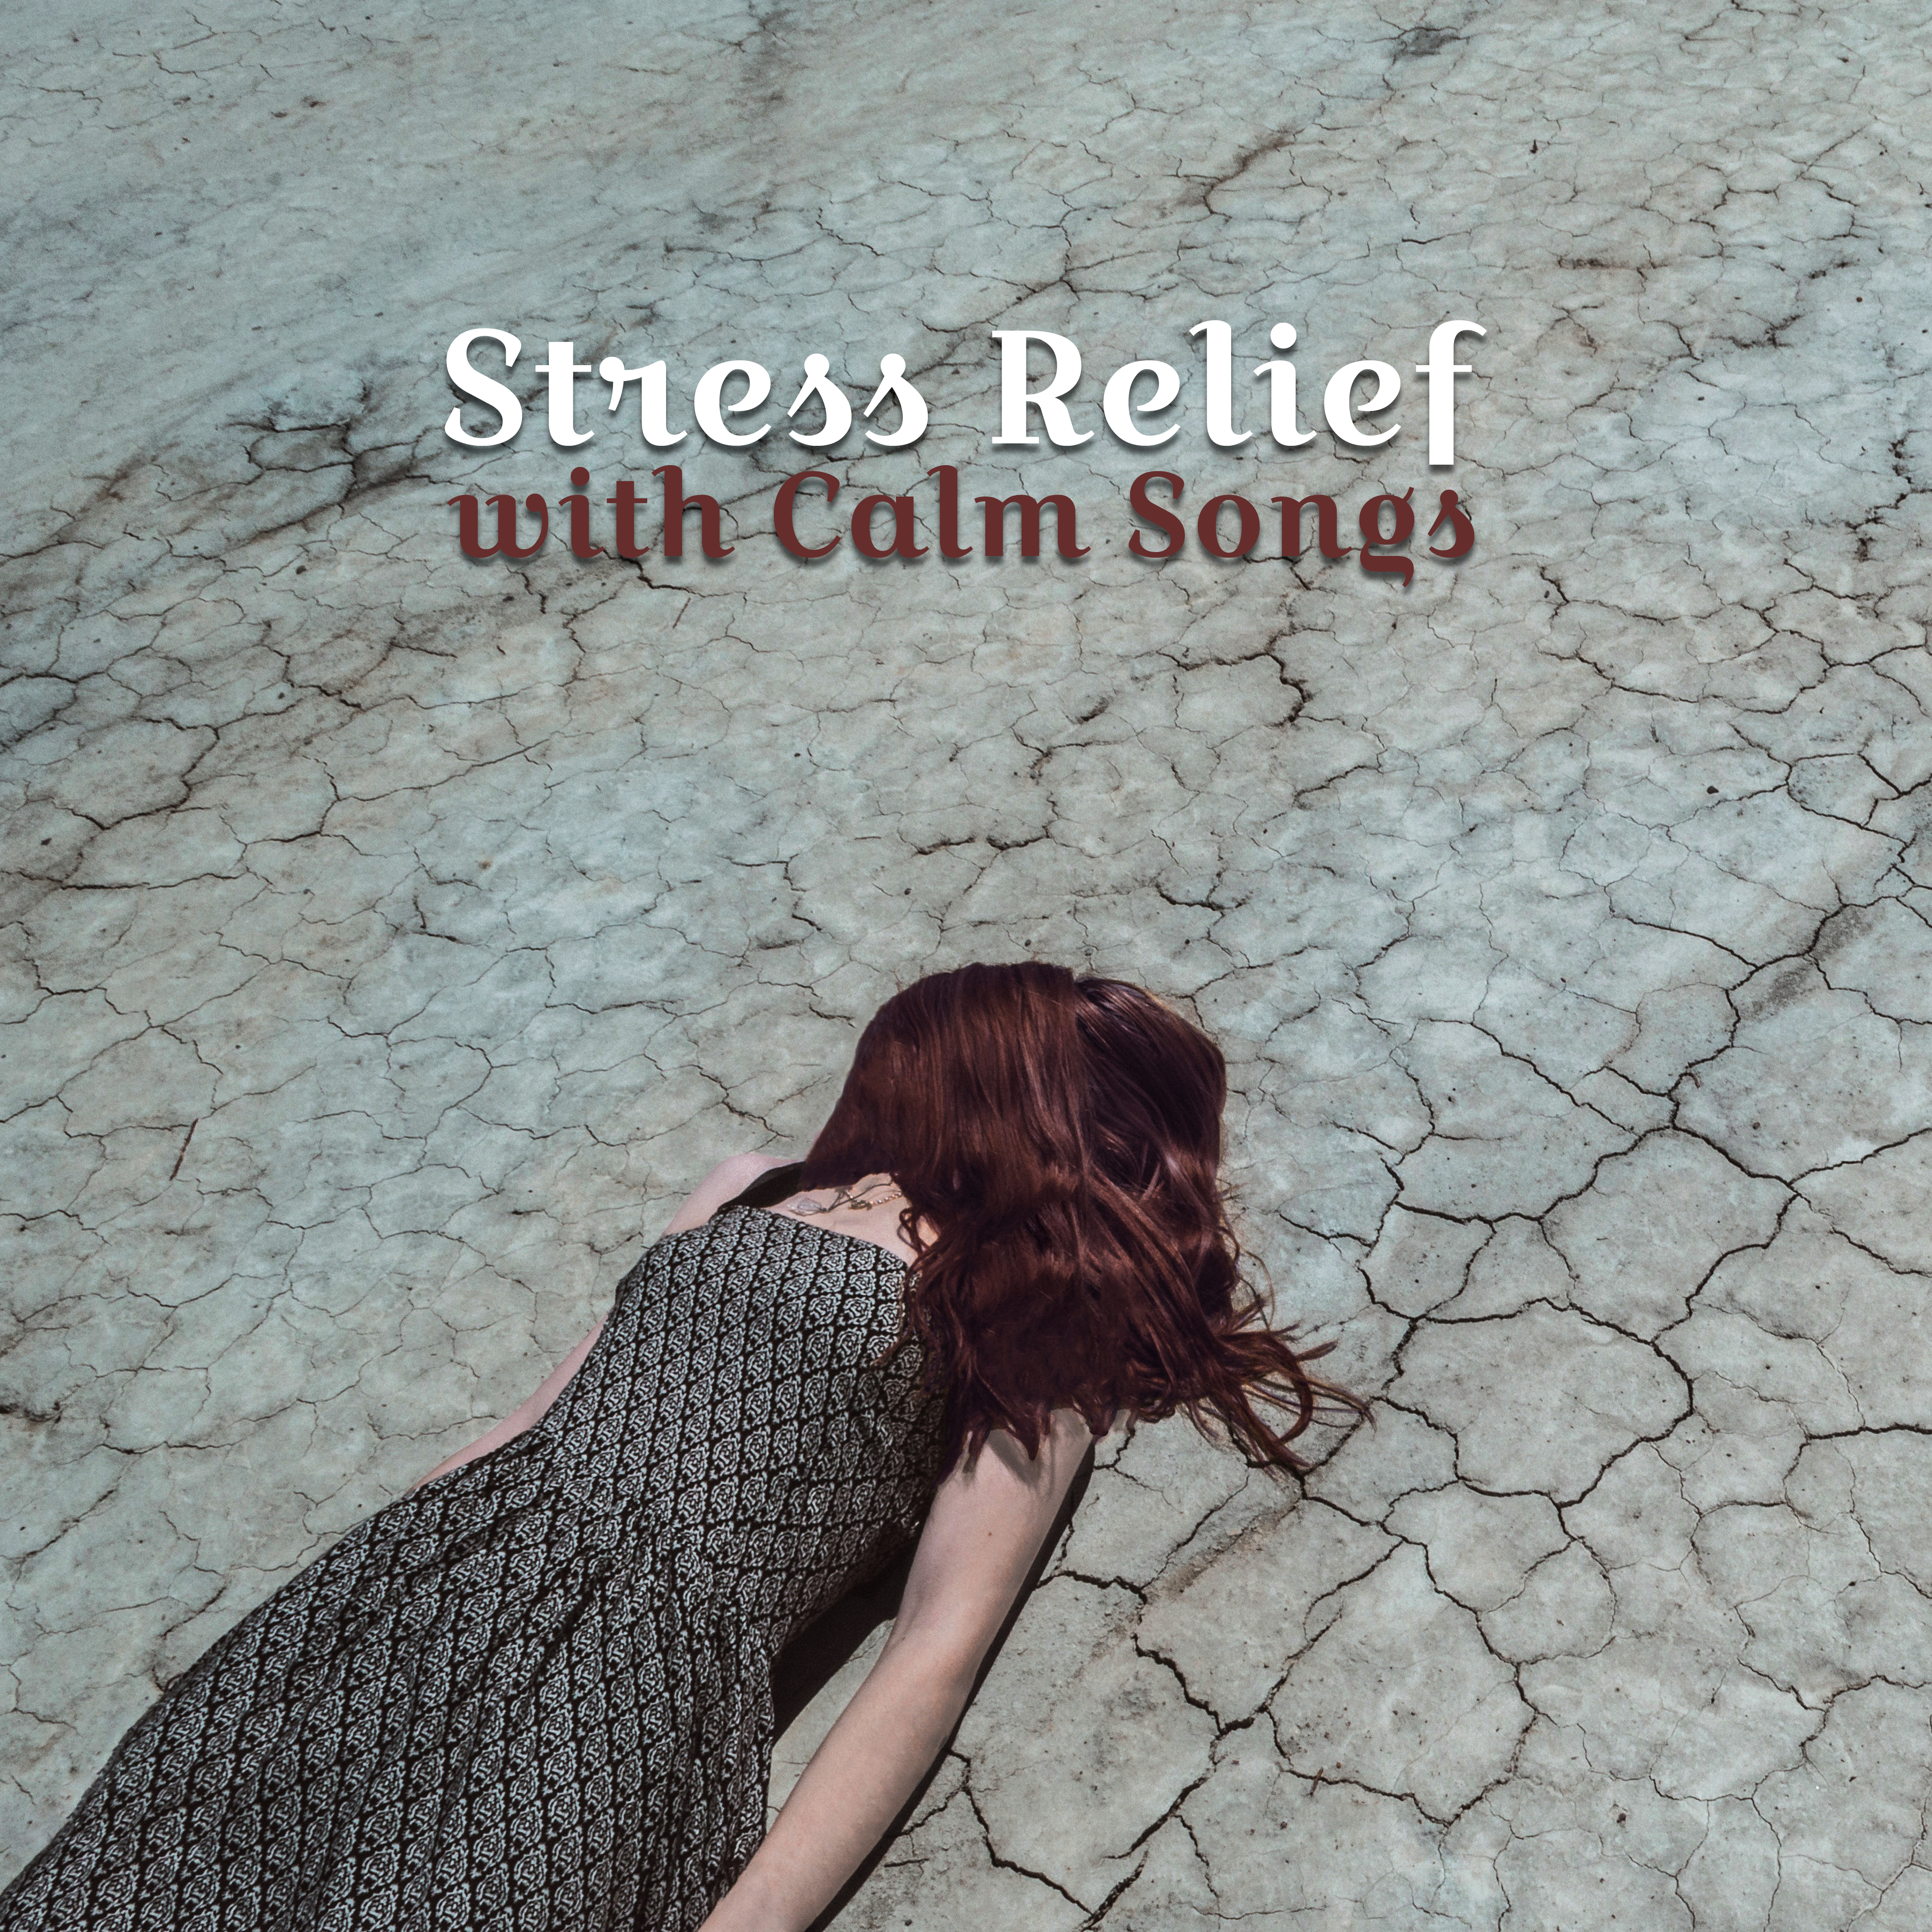 Stress Relief with Calm Songs  Ambient Sounds to Relax, New Age Music, Rest with Peaceful Waves